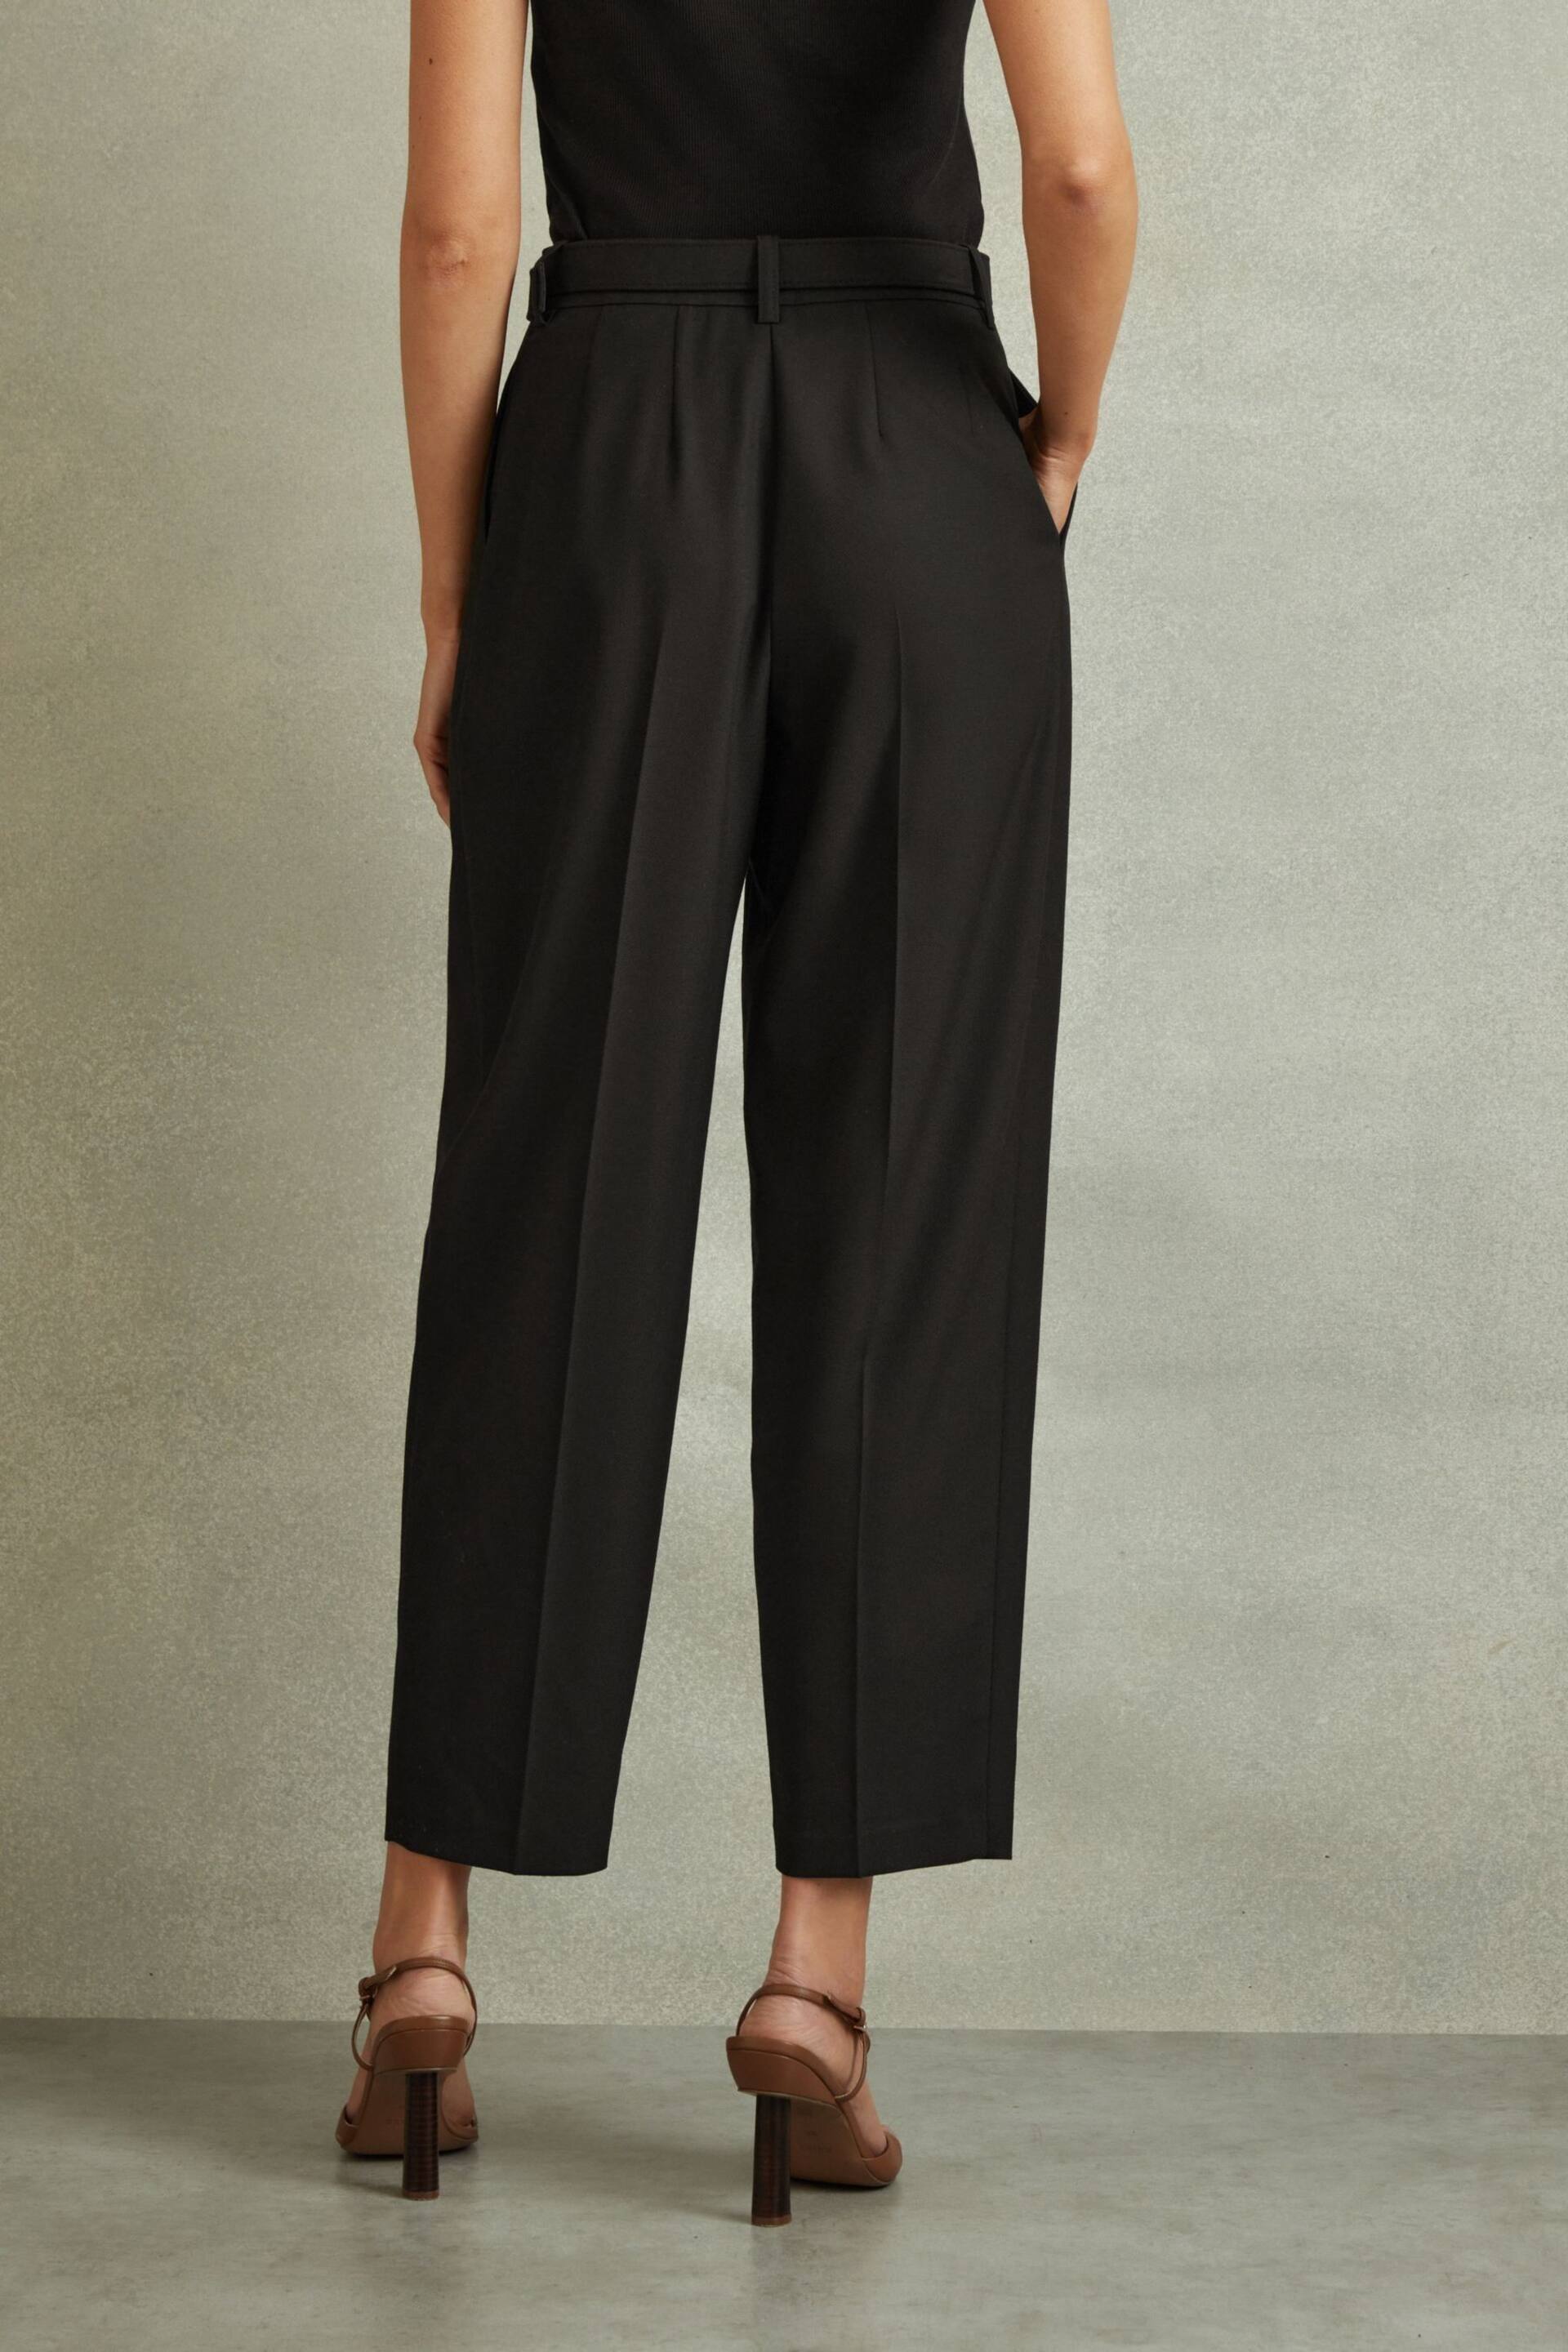 Reiss Black Freja Petite Tapered Belted Trousers - Image 5 of 7